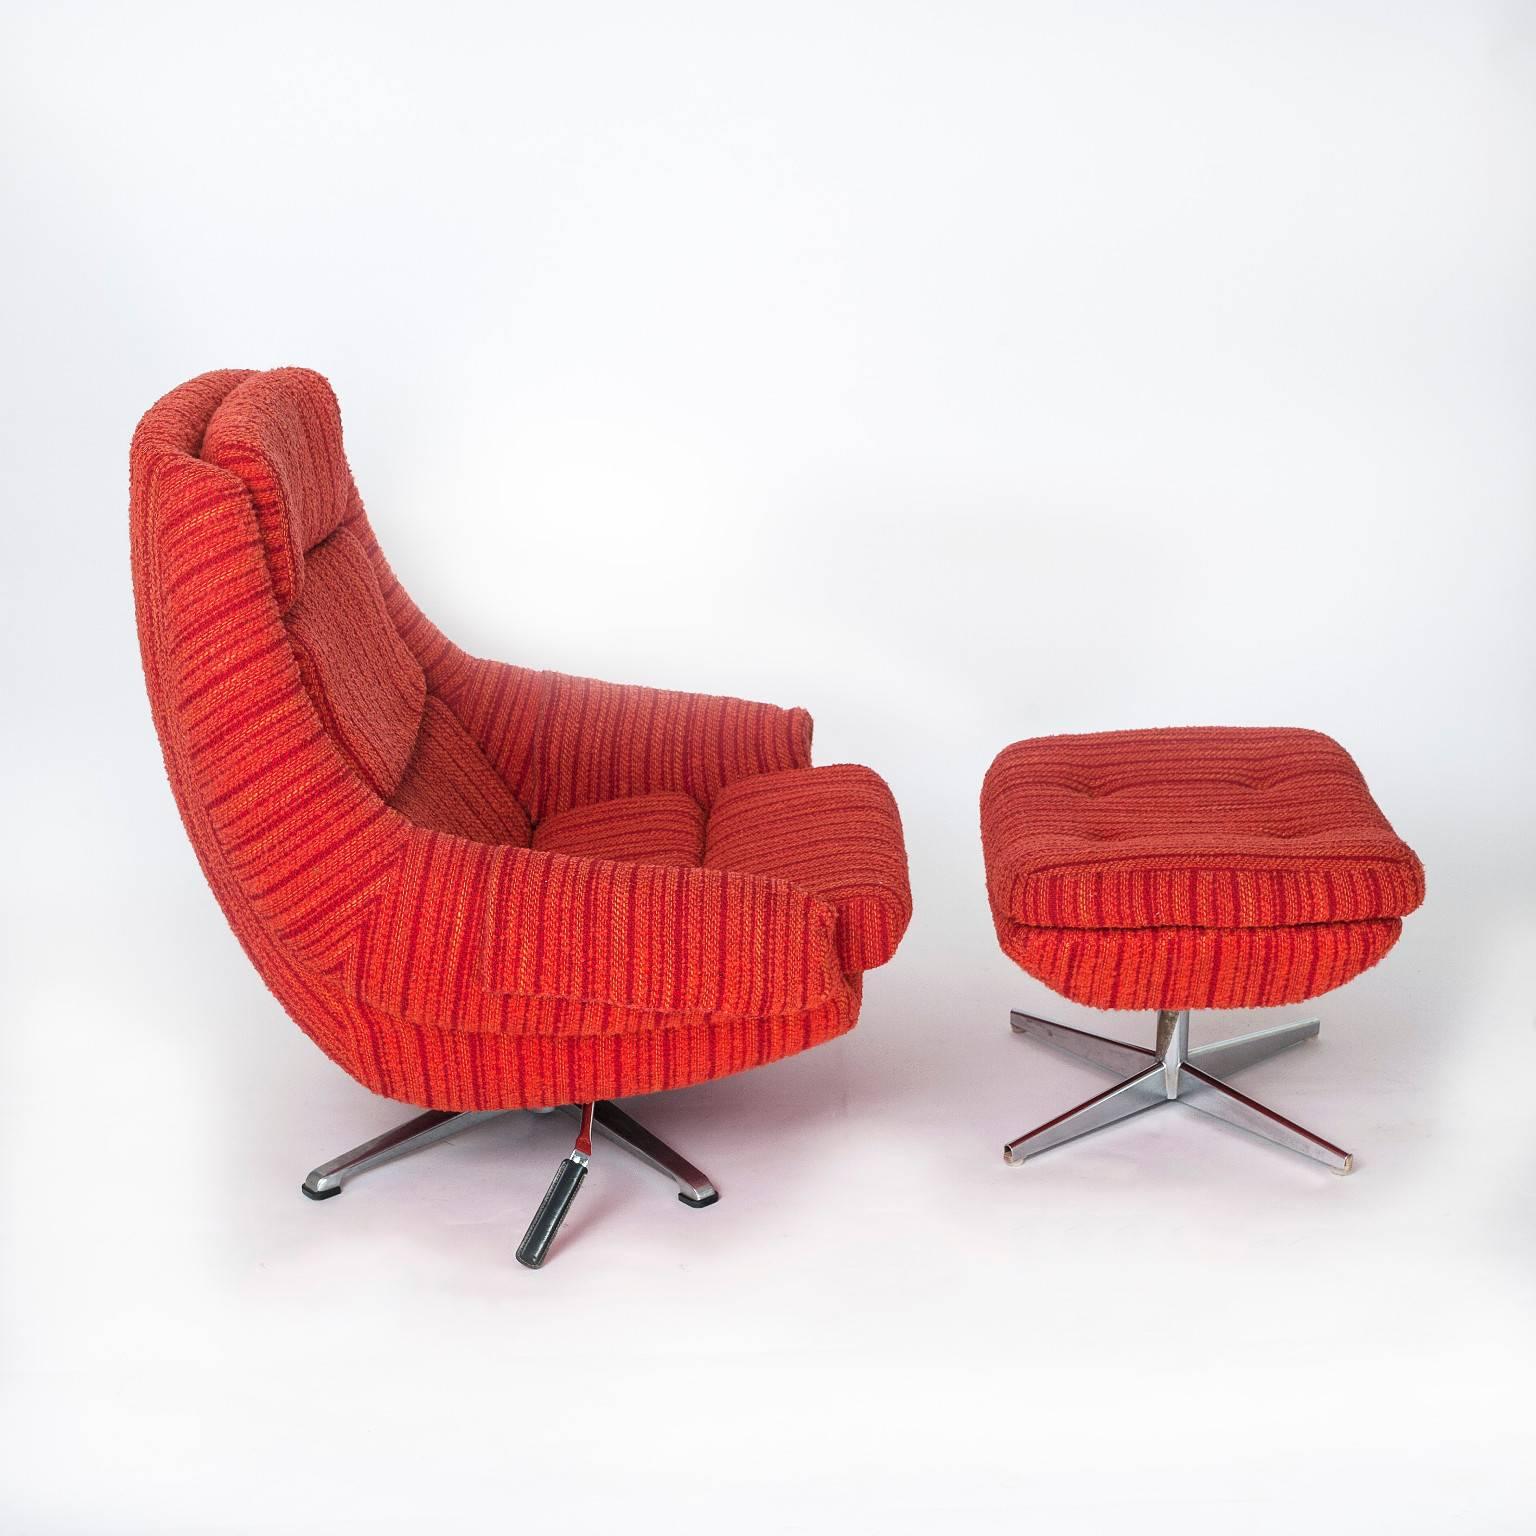 These are original 1960s DUX manufactured lounge chairs with matching stools.

Covered in their original 1960s orange, red and yellow loose woolen fabric (see last image for close up). The chairs have loose foam back and seat cushions which give